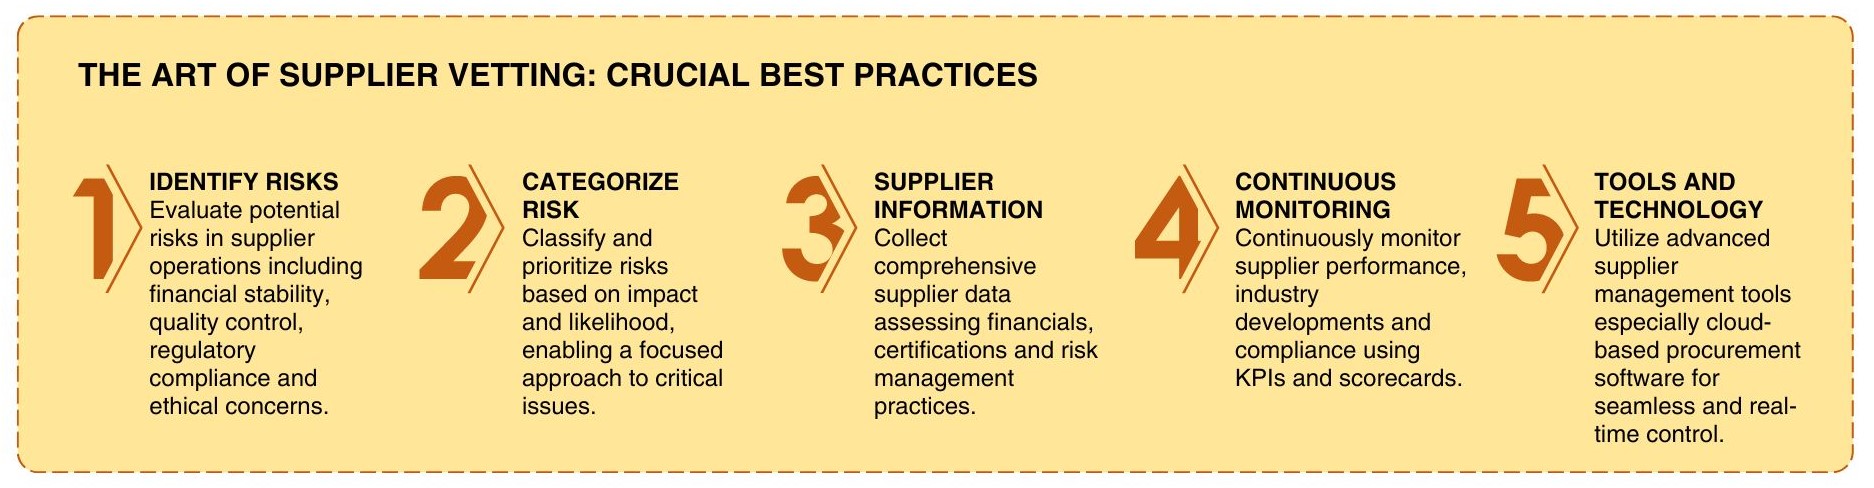 supplier-vetting-best-practices-you-should-know